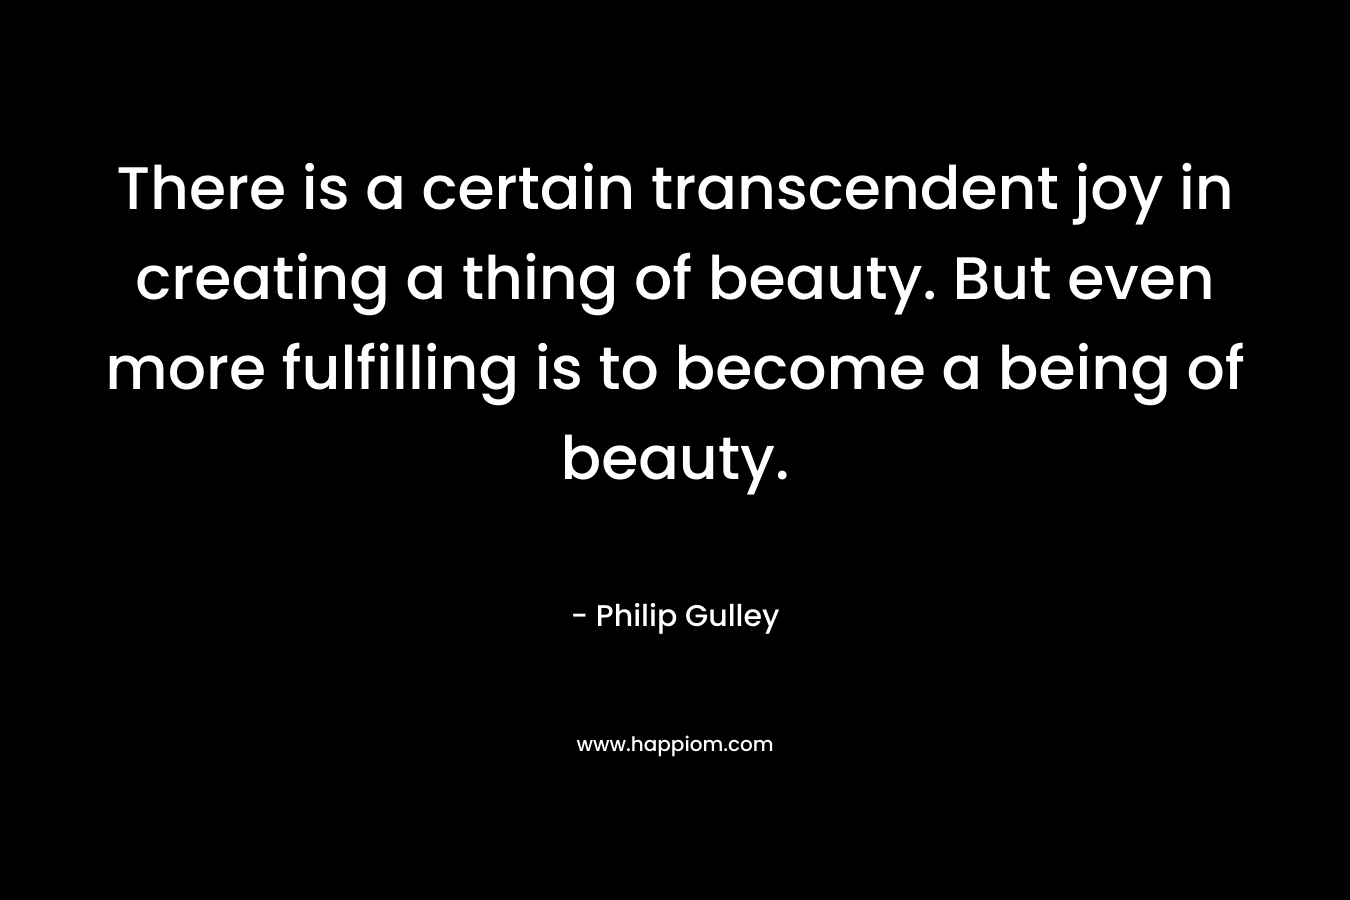 There is a certain transcendent joy in creating a thing of beauty. But even more fulfilling is to become a being of beauty. – Philip Gulley